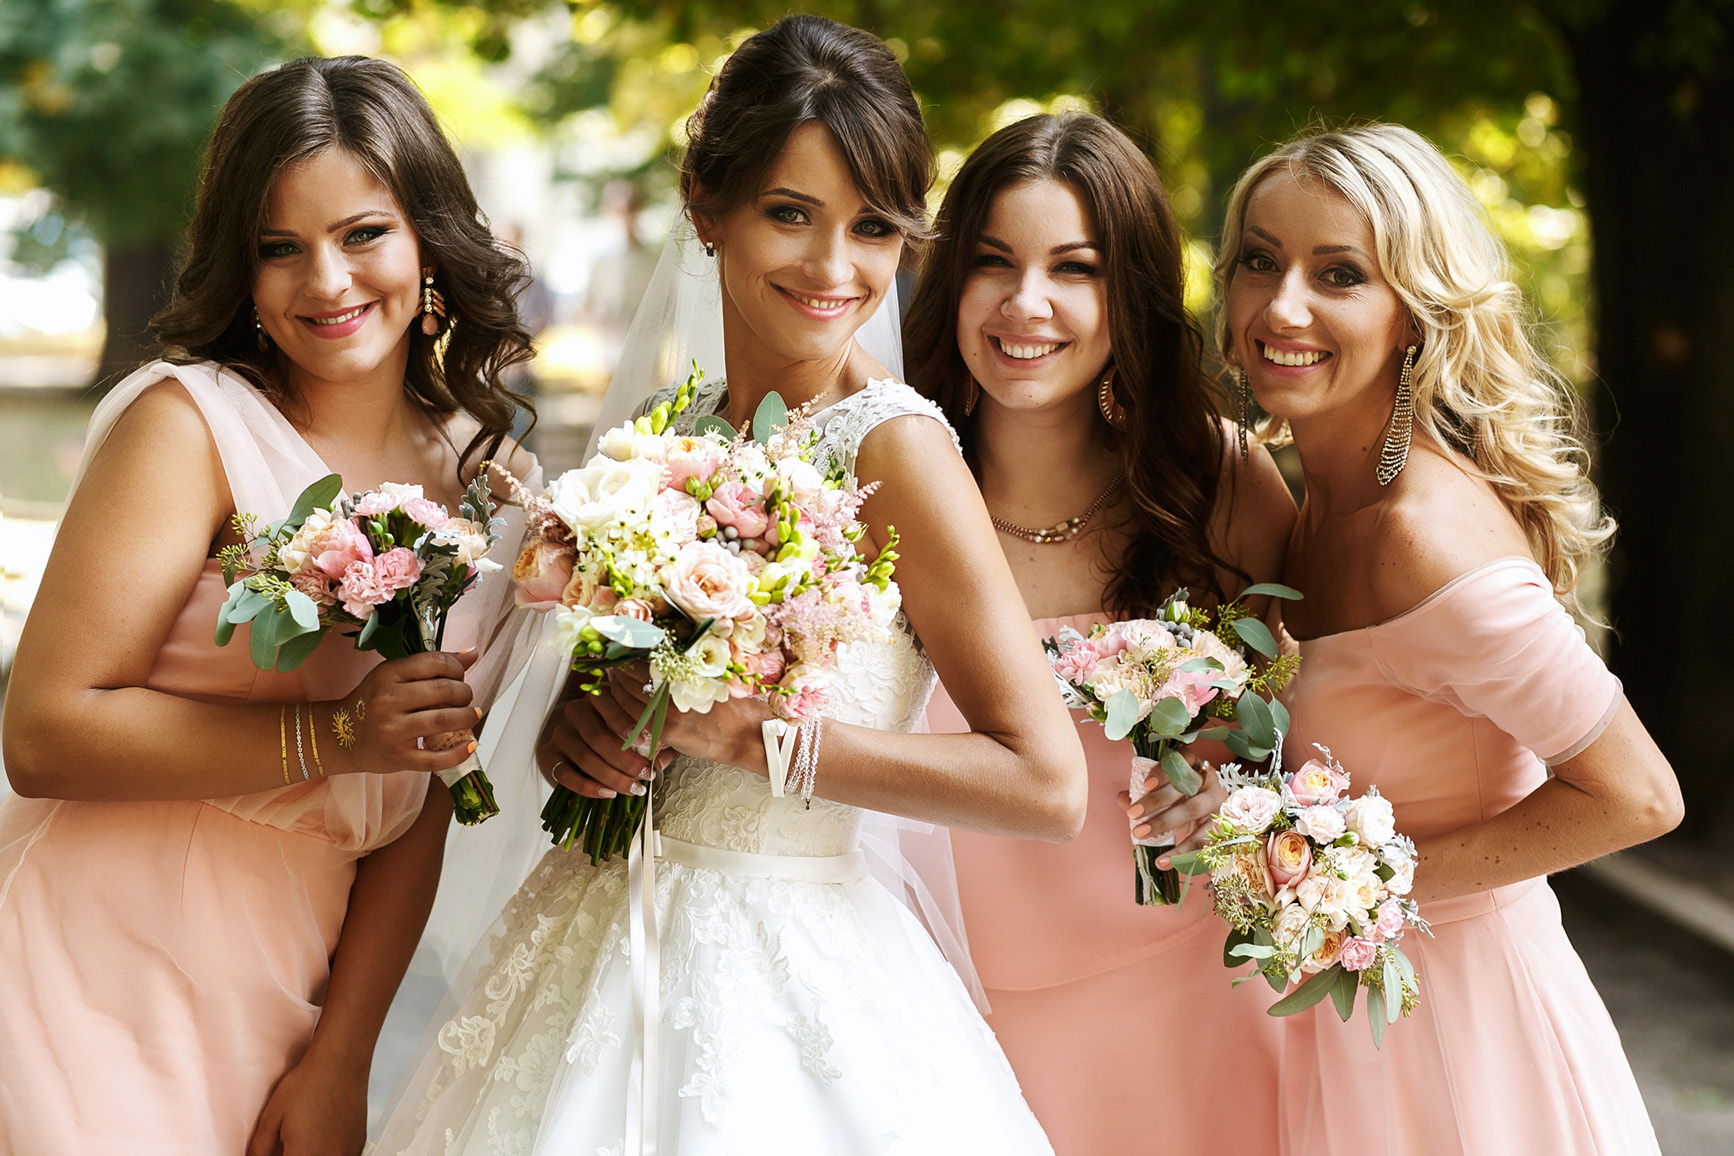 Smiling bride and bridesmaids in pink dresses outside